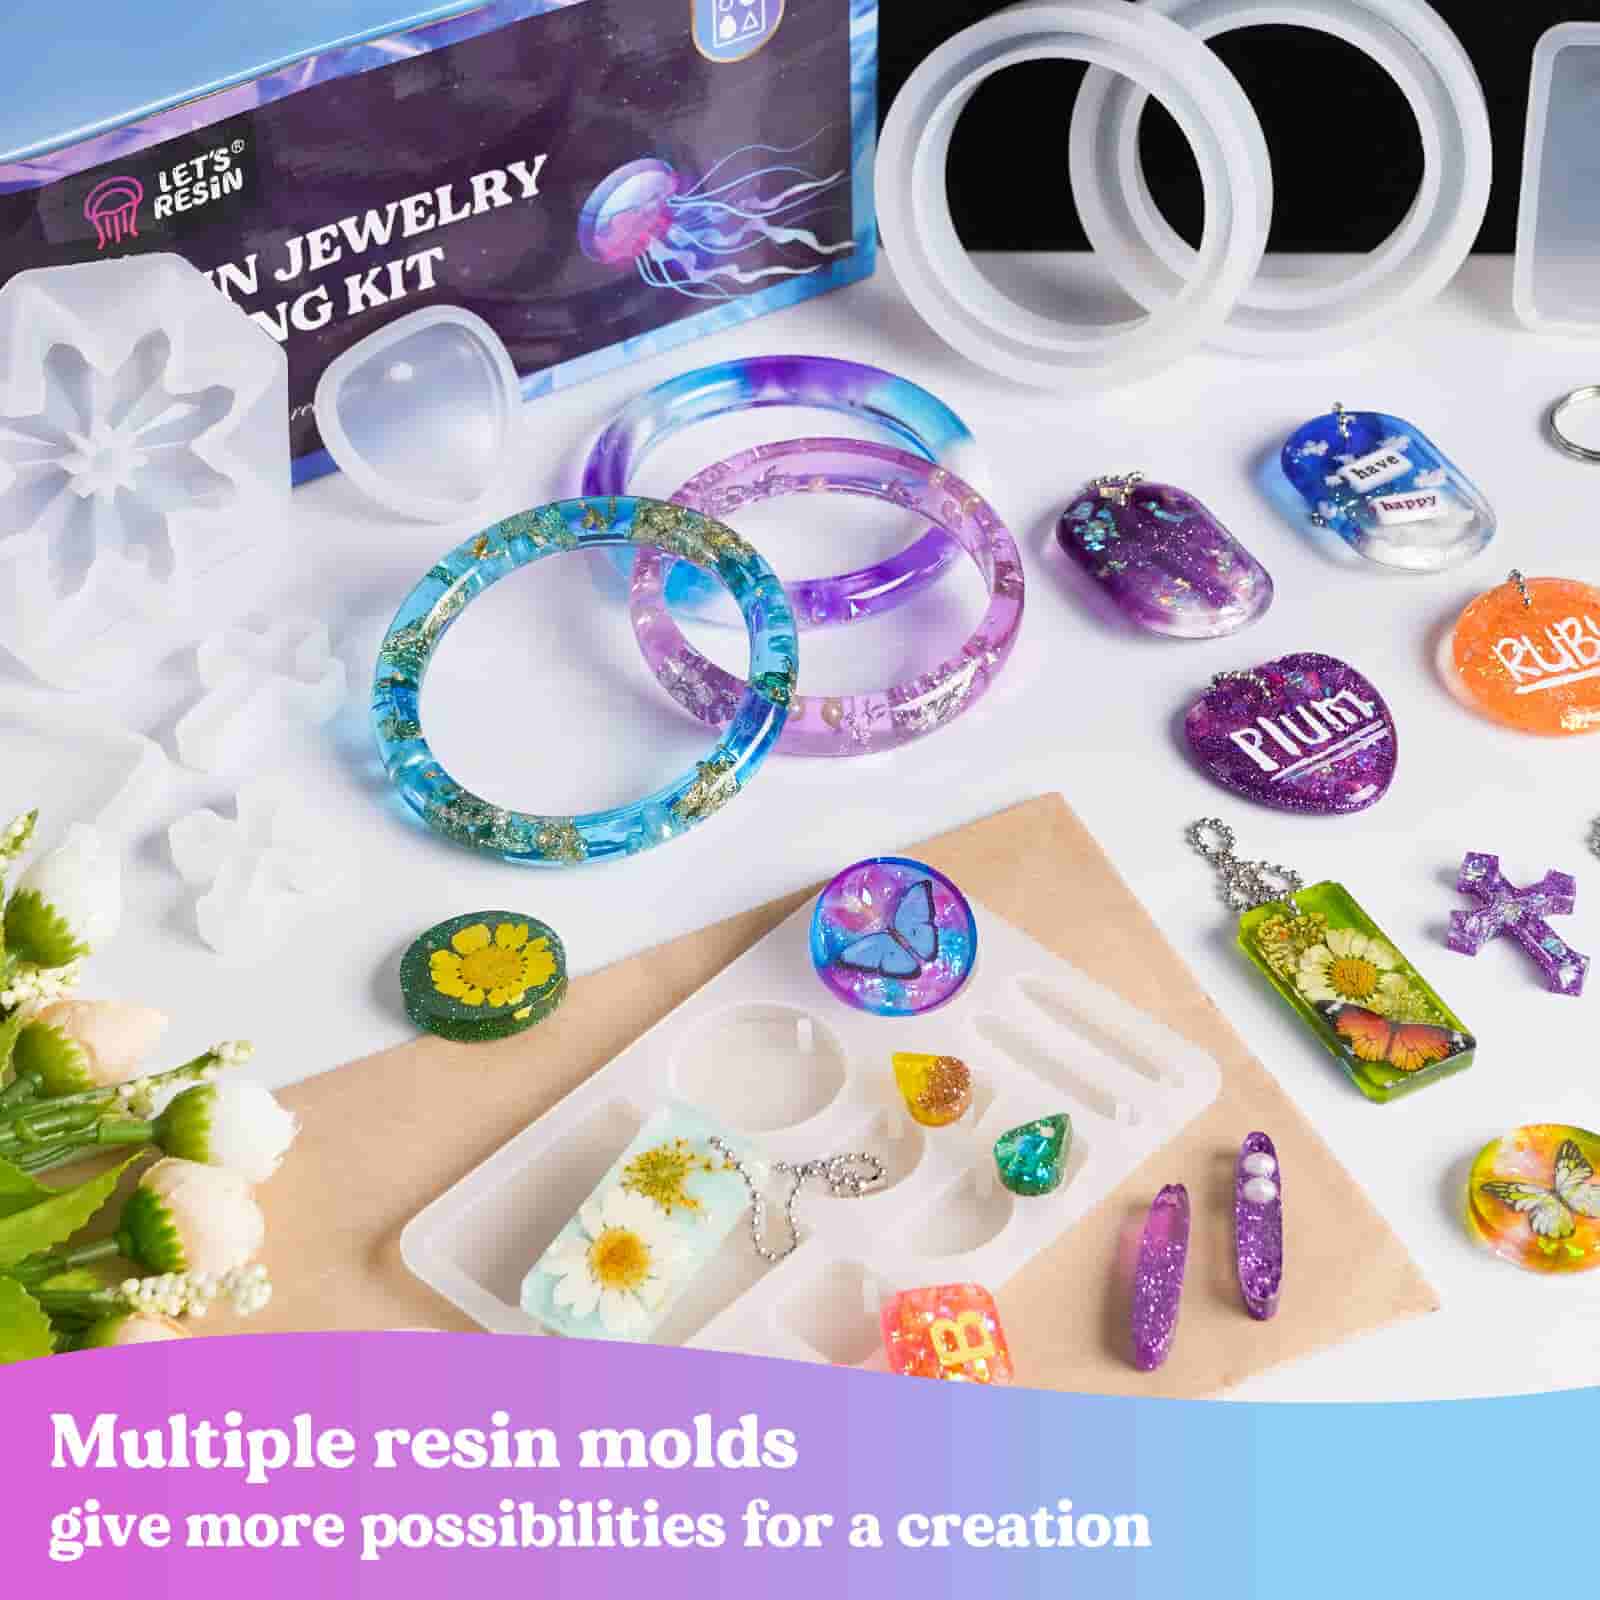 UV Resin Kit with Light,153Pcs Resin Jewelry Making Kit with Highly Clear  UV Resin, UV Lamp, Resin Accessories, Epoxy Resin Starter Kit for Keychain,  Jewelry — Let's Resin - CA